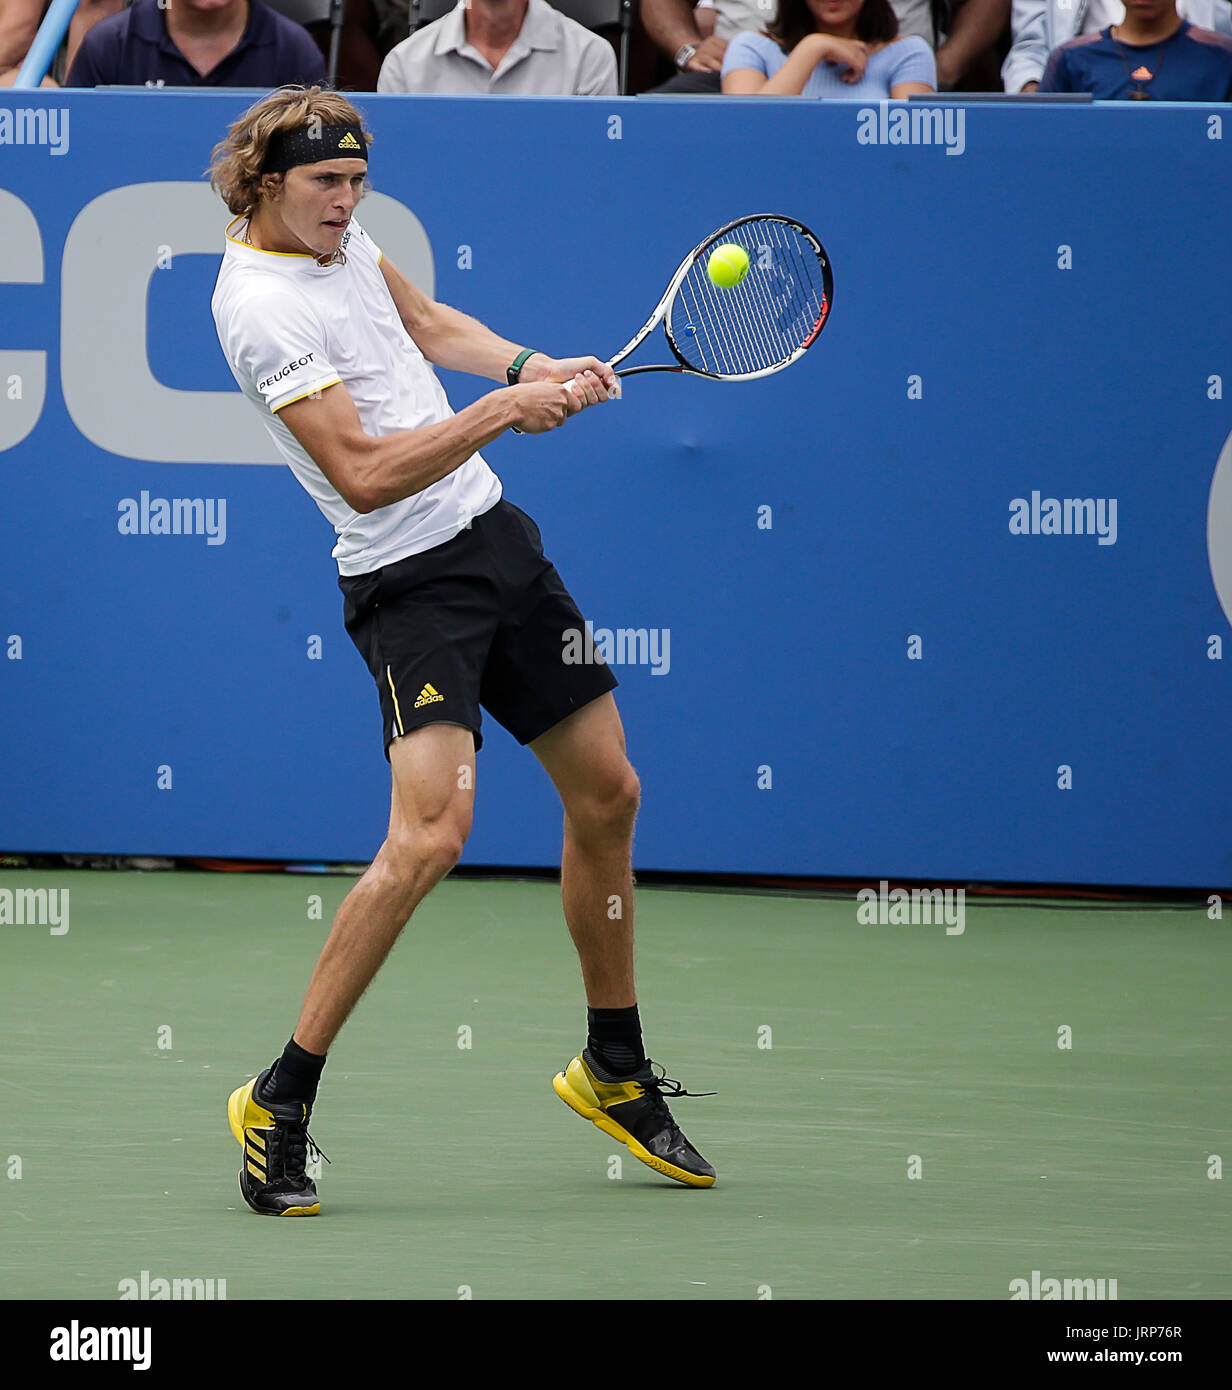 Washington DC, USA. 06th Aug, 2017. Alexander Zverev (GER) takes a backhand  shot during the final match at the 2017 Citi Open tennis tournament being  played at Rock Creek Park Tennis Center